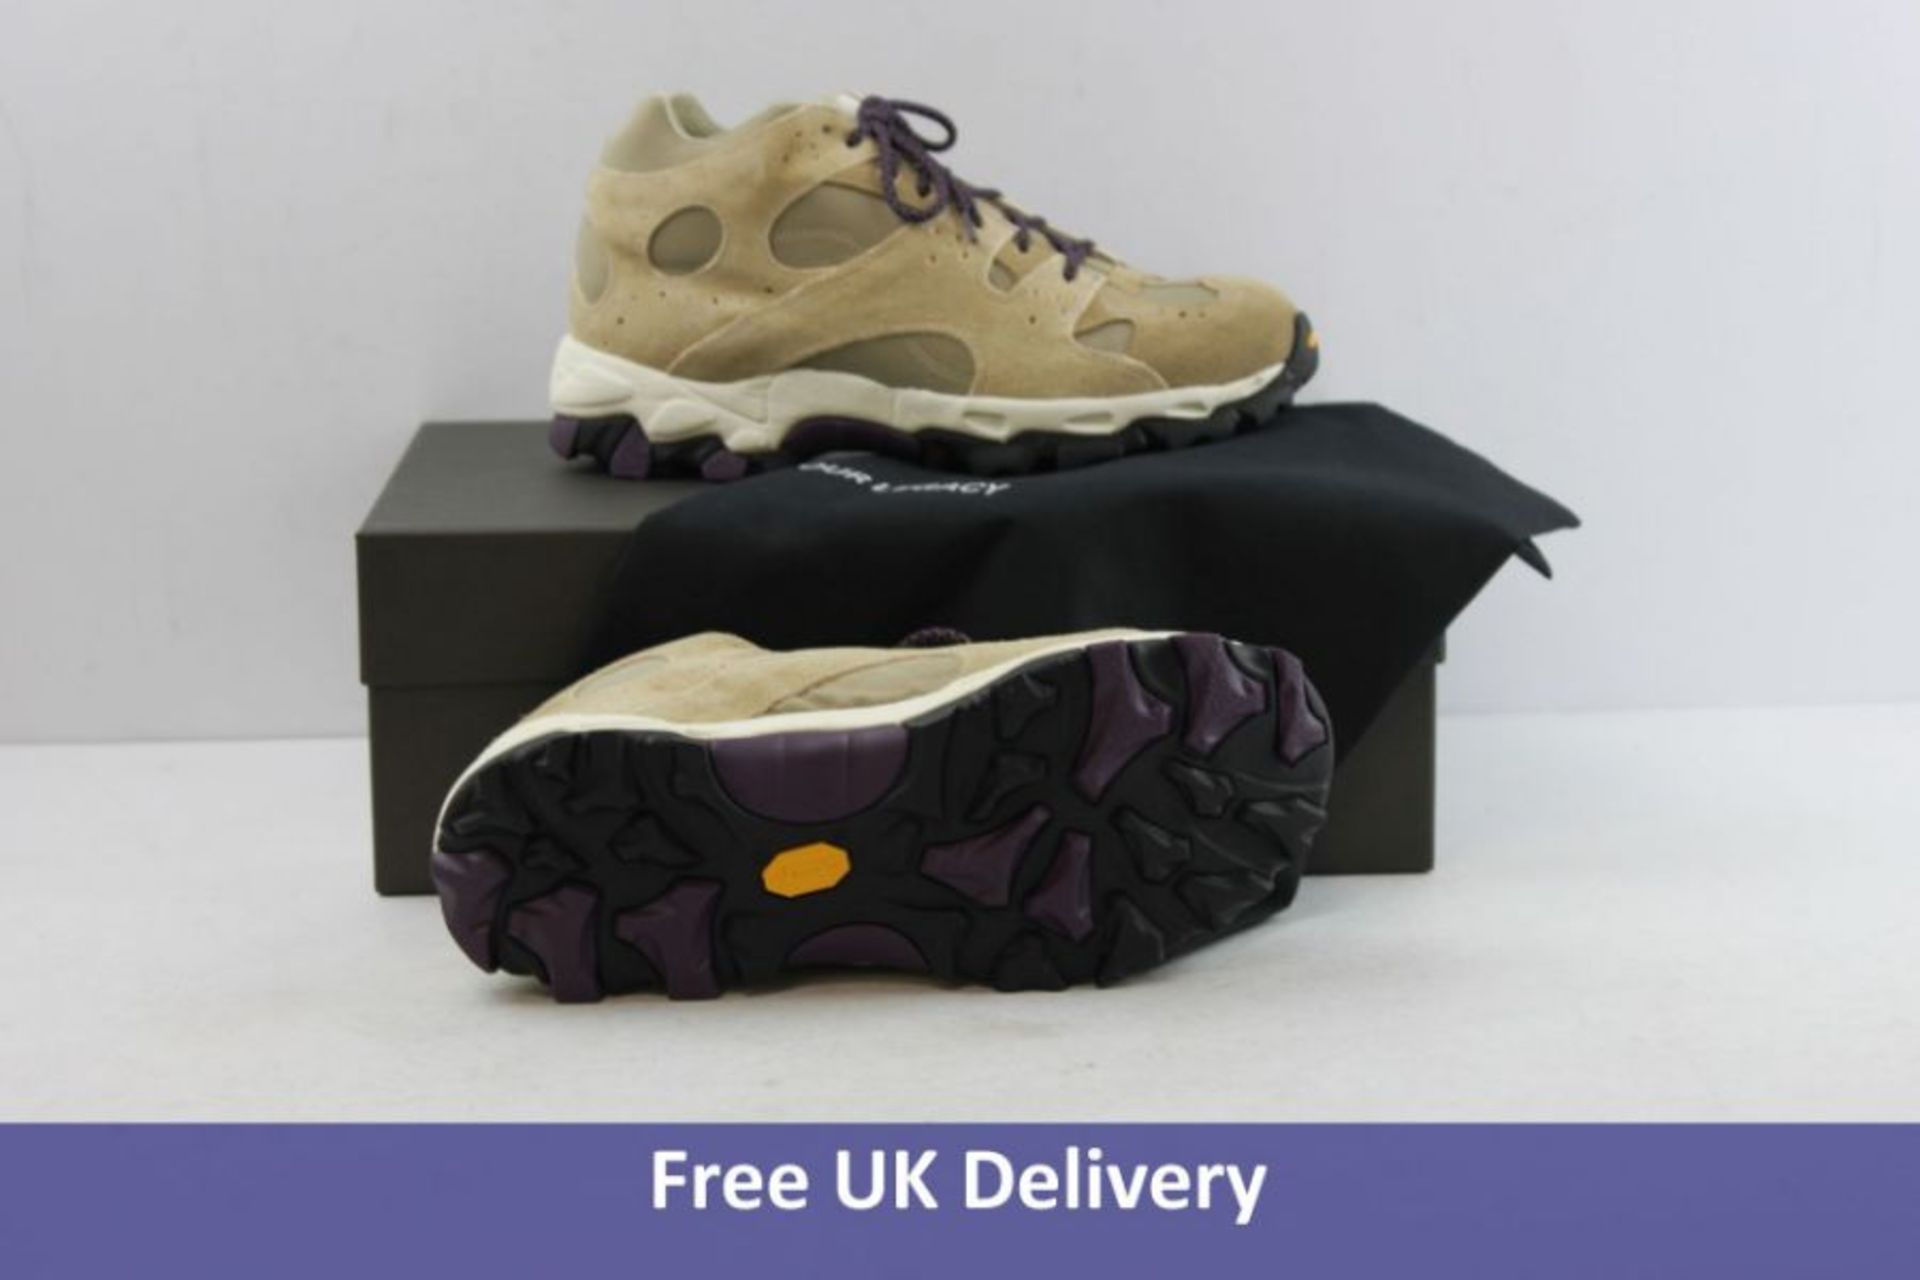 Our Legacy, Cage Sneaker, Walking Shoes, Sawdust, UK 6.5